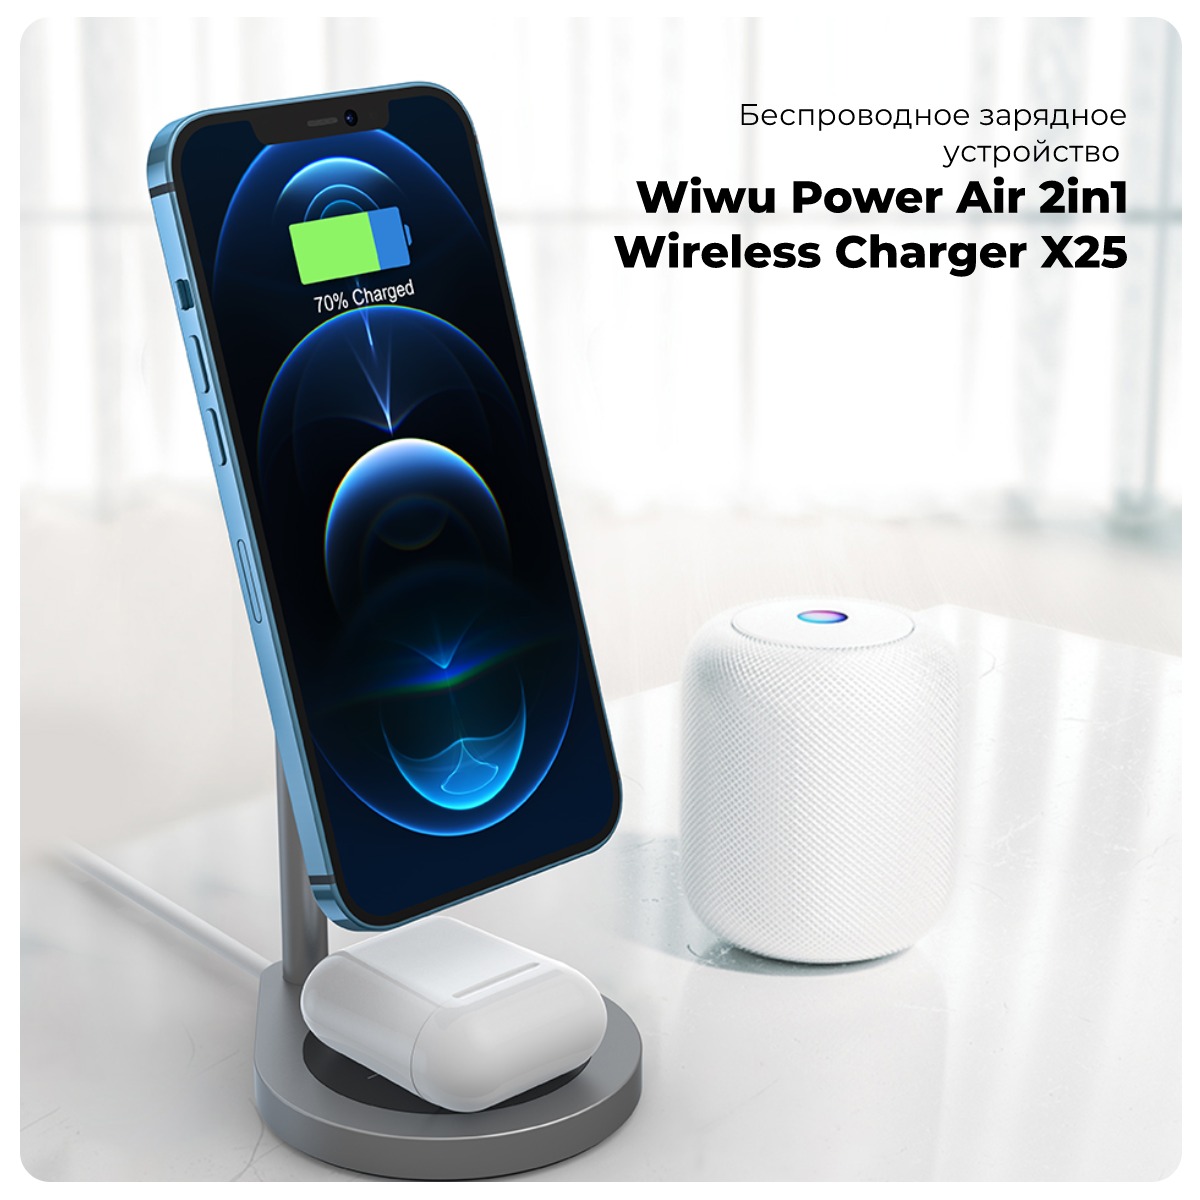 Wiwu-Power-Air-2in1-Wireless-Charger-X25-01